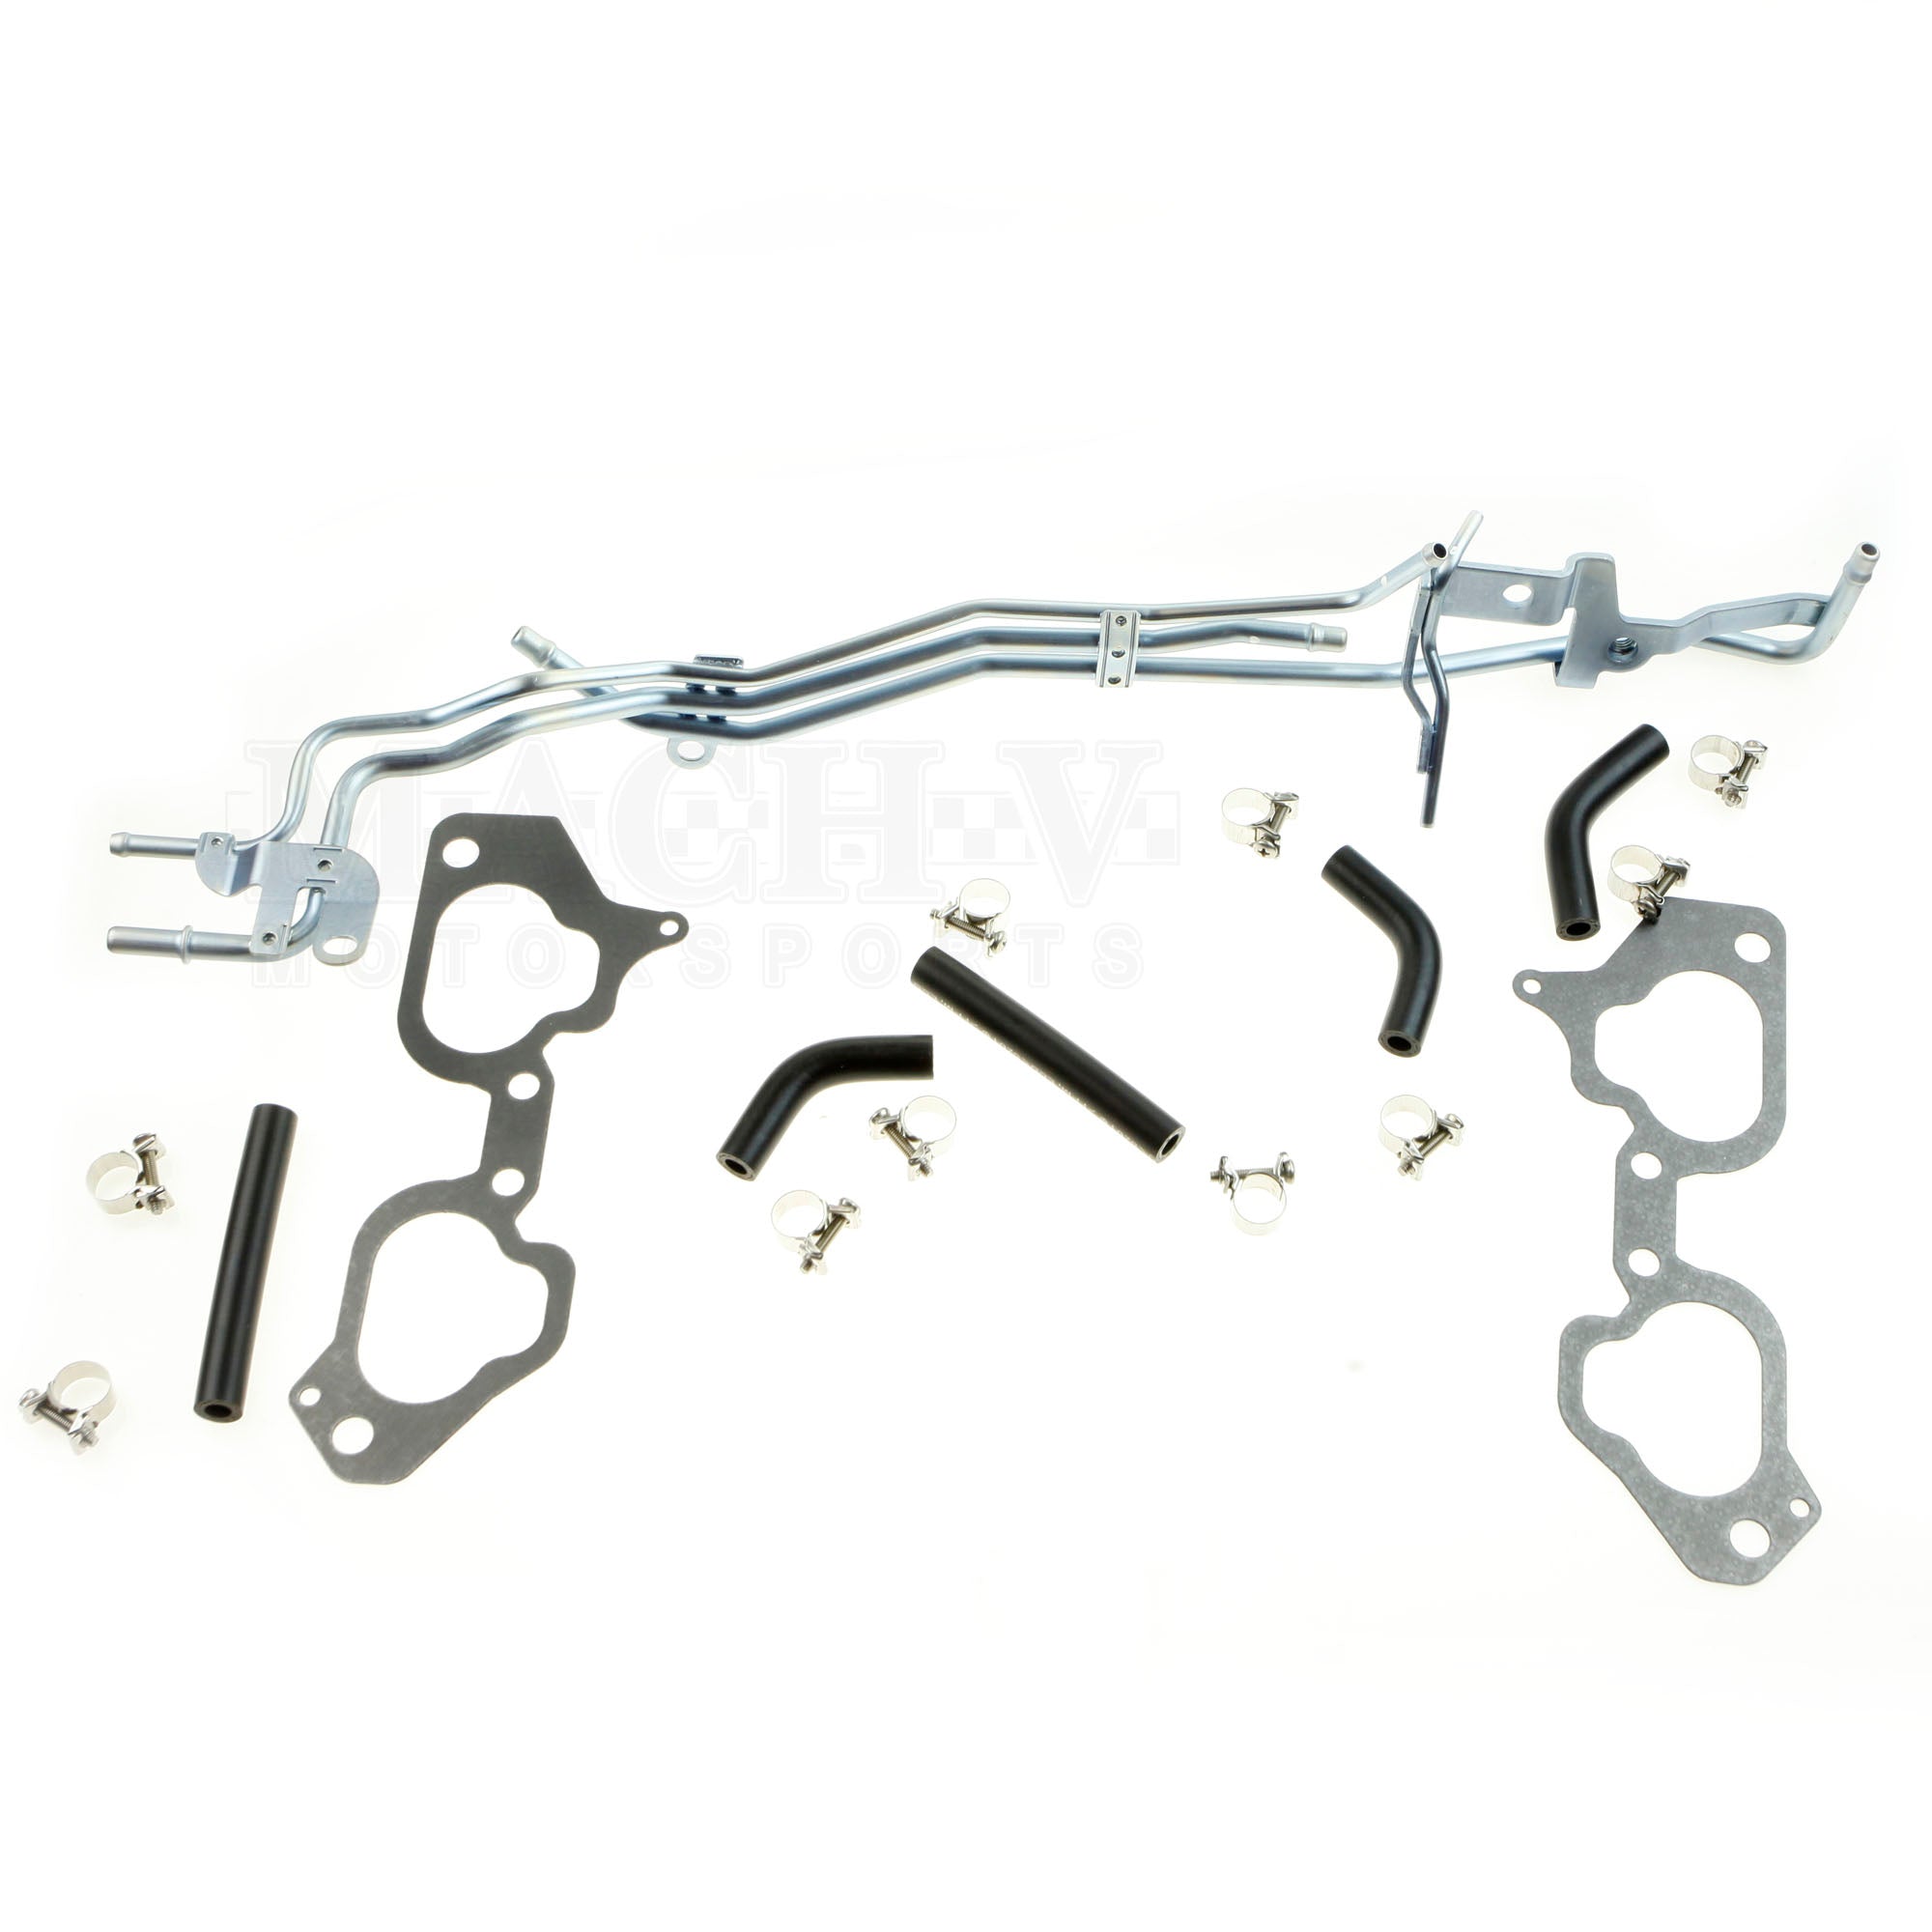 Subaru Fuel Line Replacement Kit 2003-2005 Forester XT